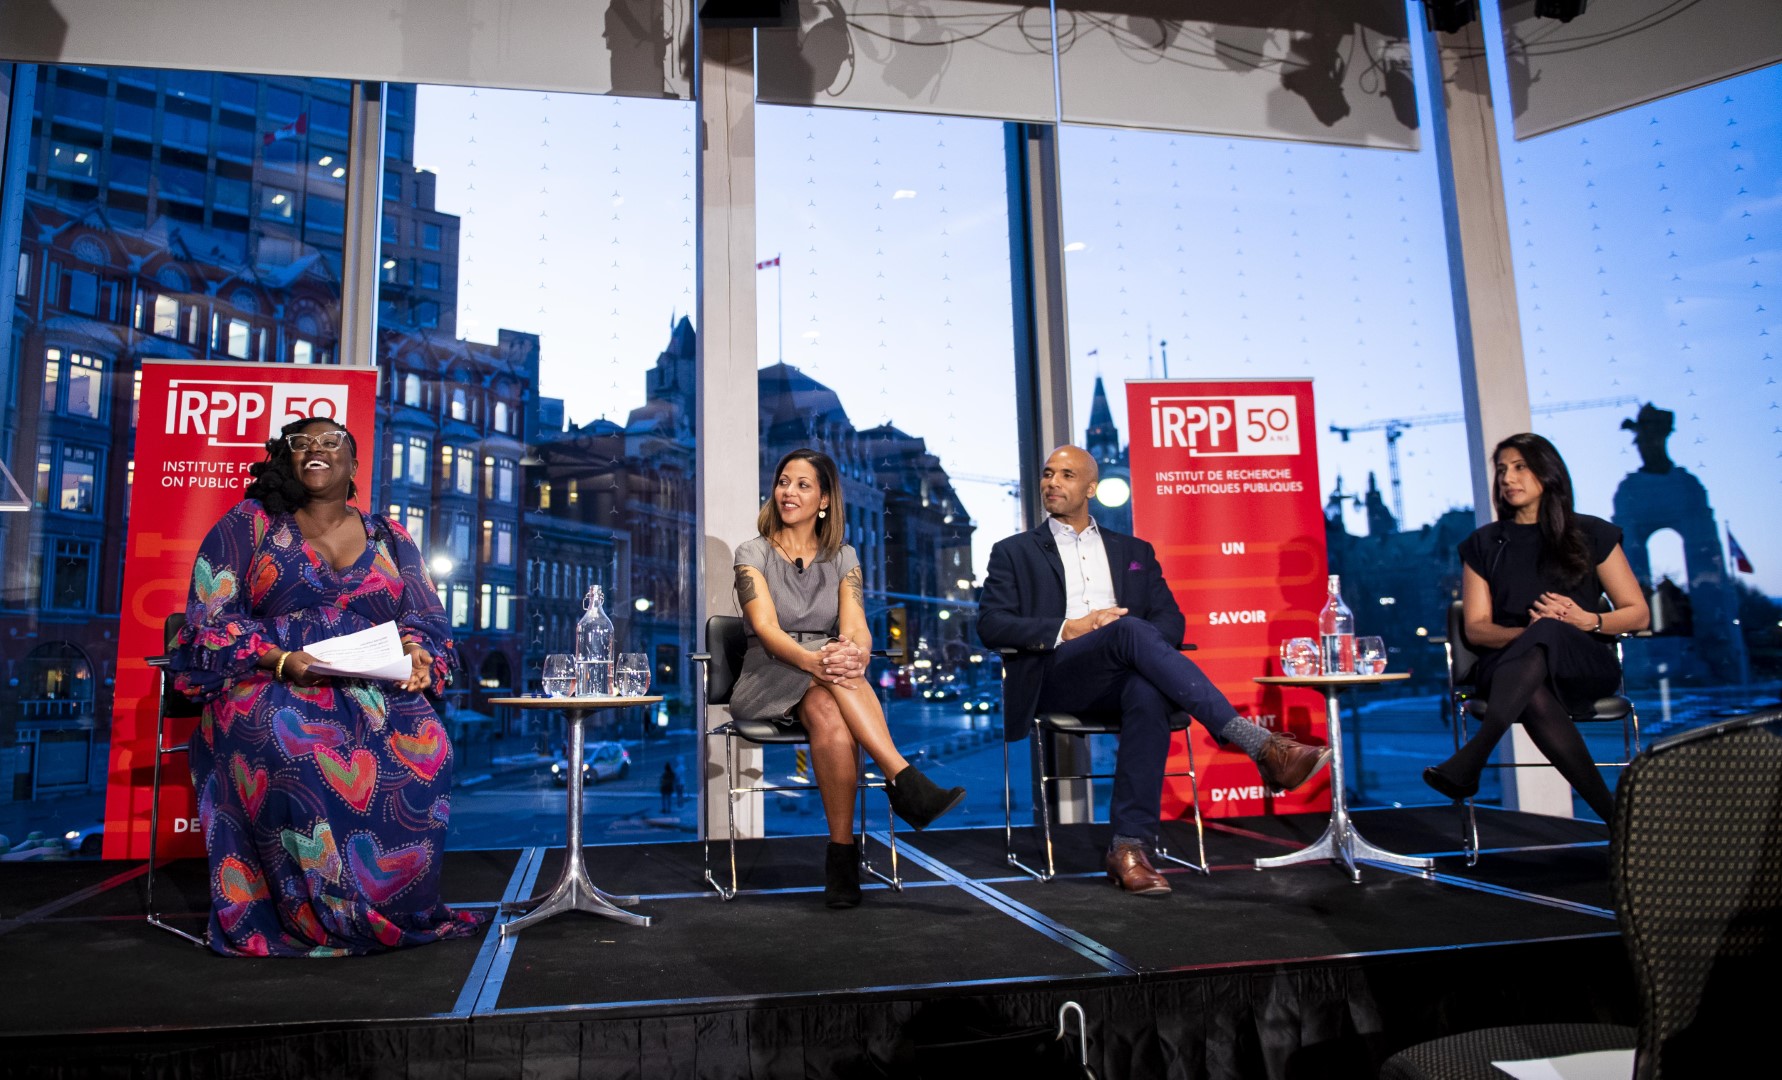 Our panel discussion, with (left to right) Nana aba Duncan, Debra Thompson, Akwasi Owusu-Bempah, and Sabreena Delhon